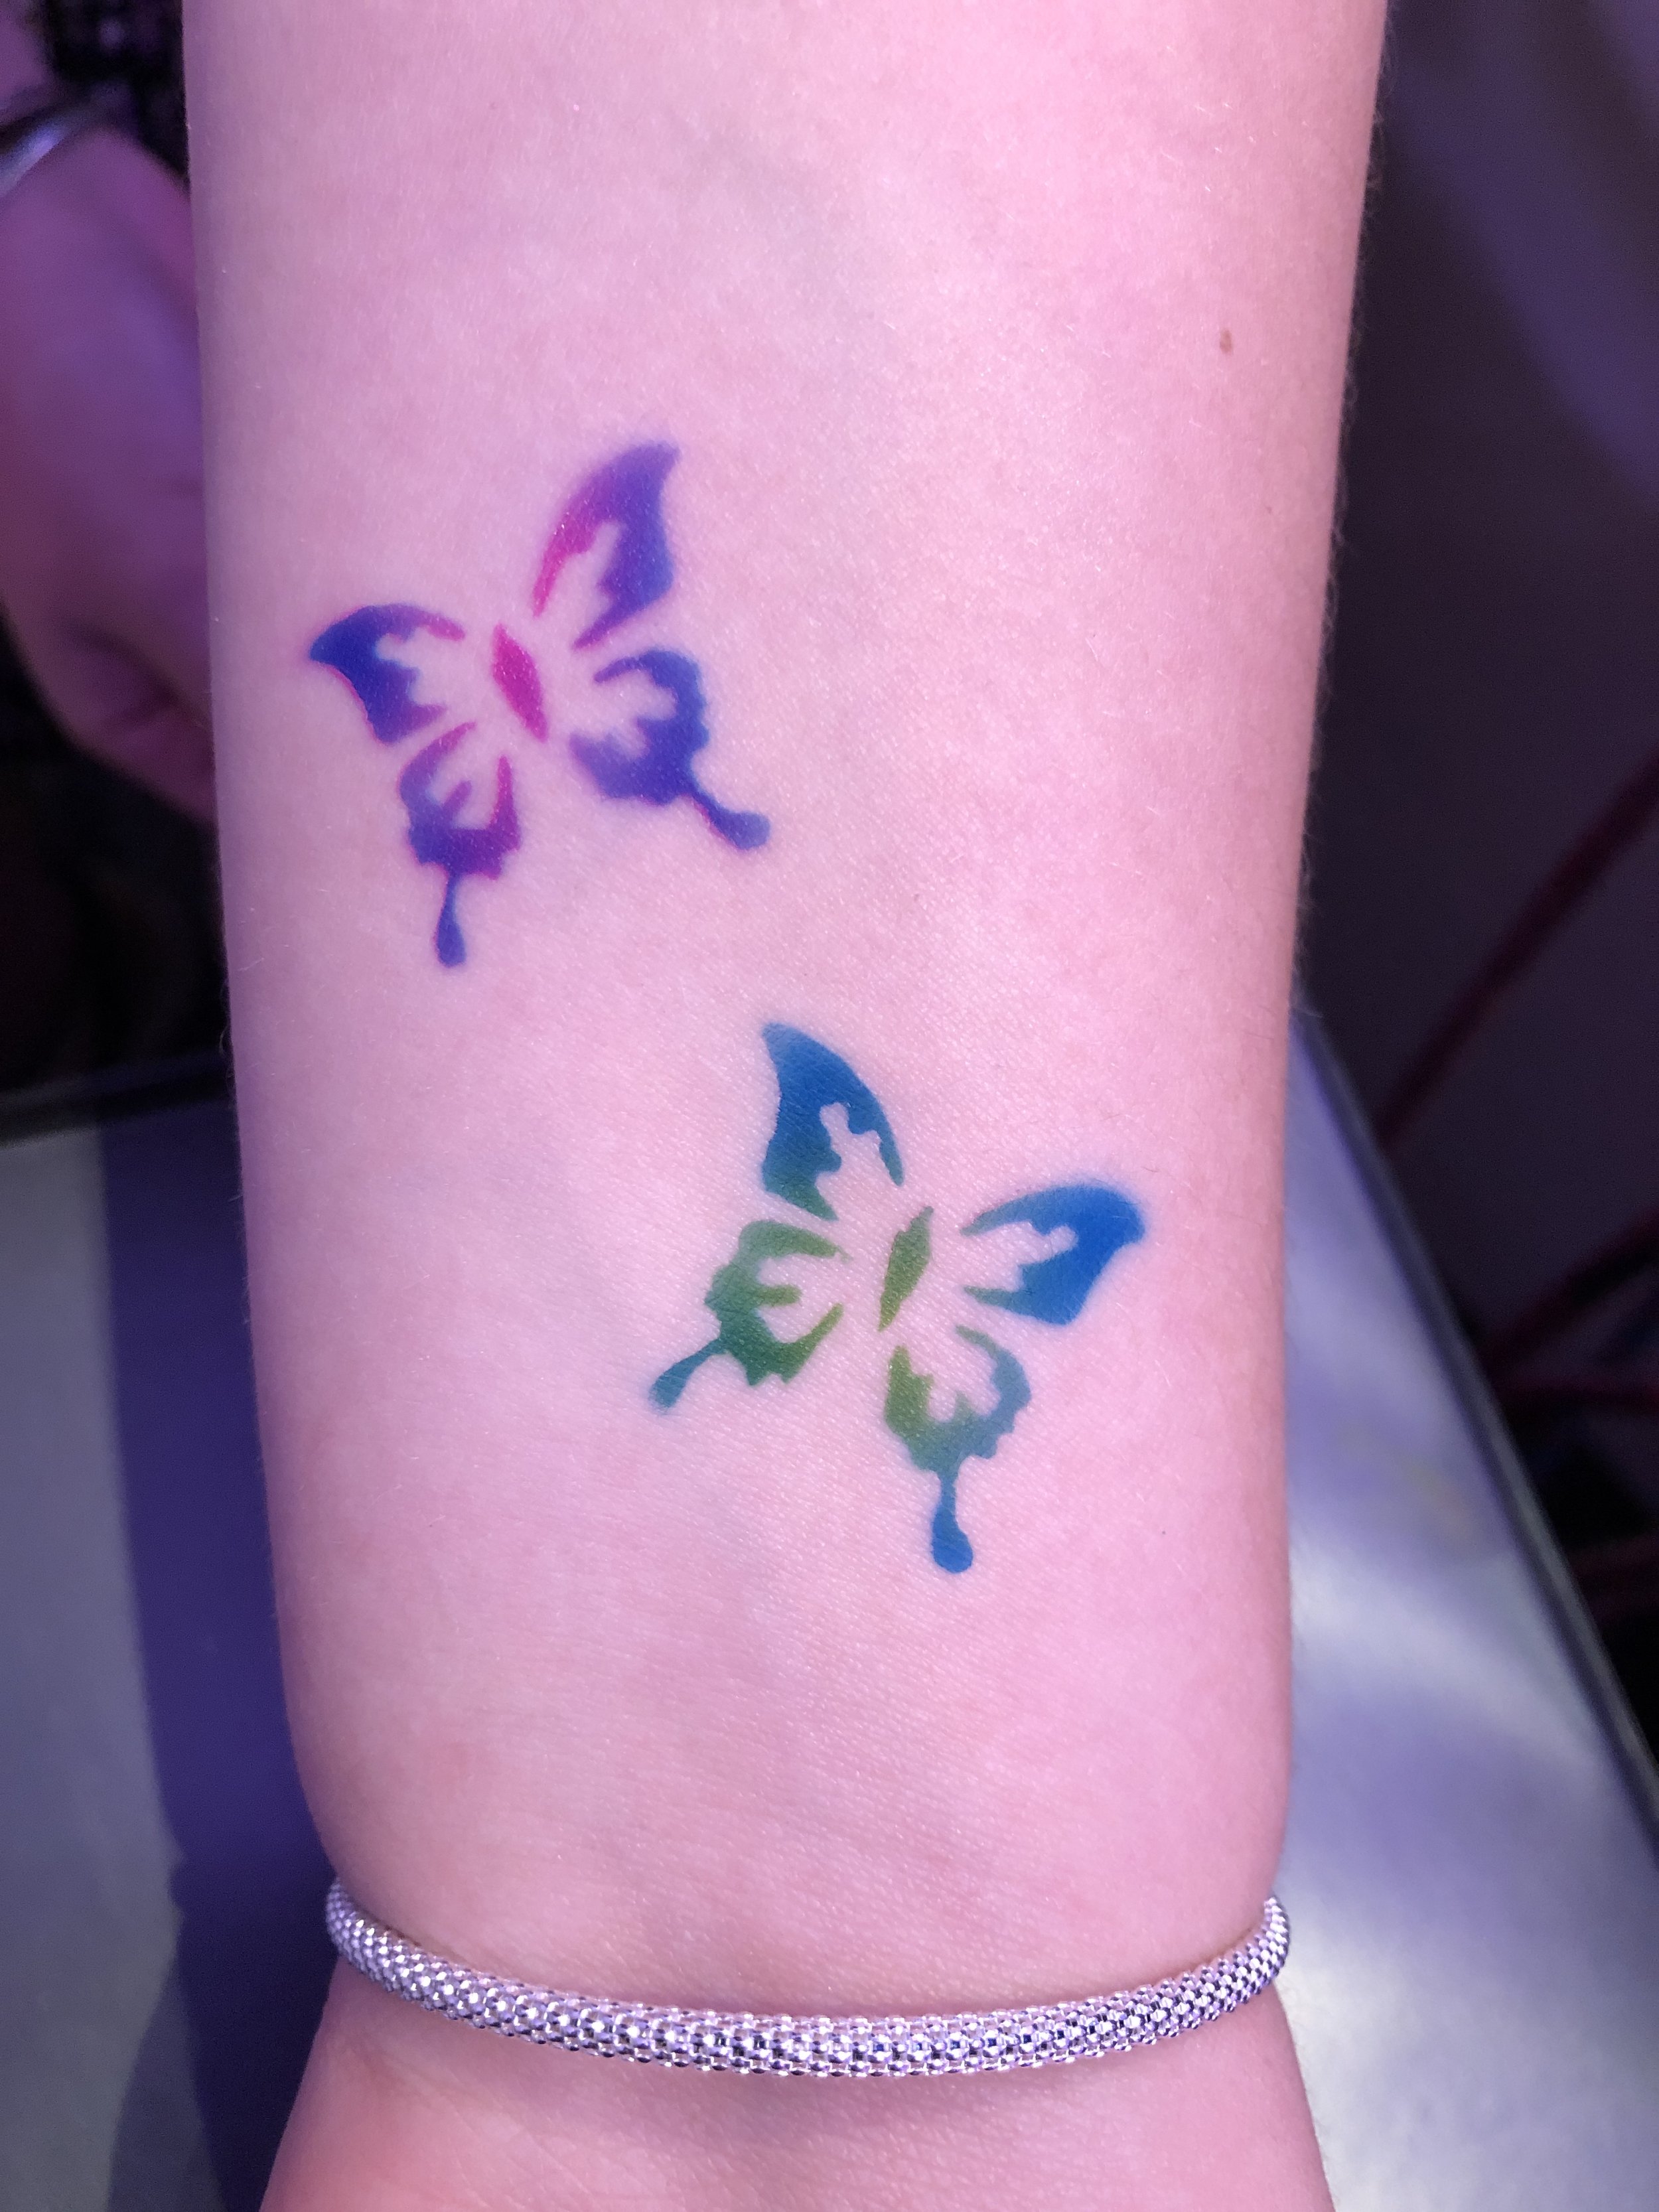 Airbrush Tattoos Near Me New York City and Brooklyn for Teens and Adults.JPG